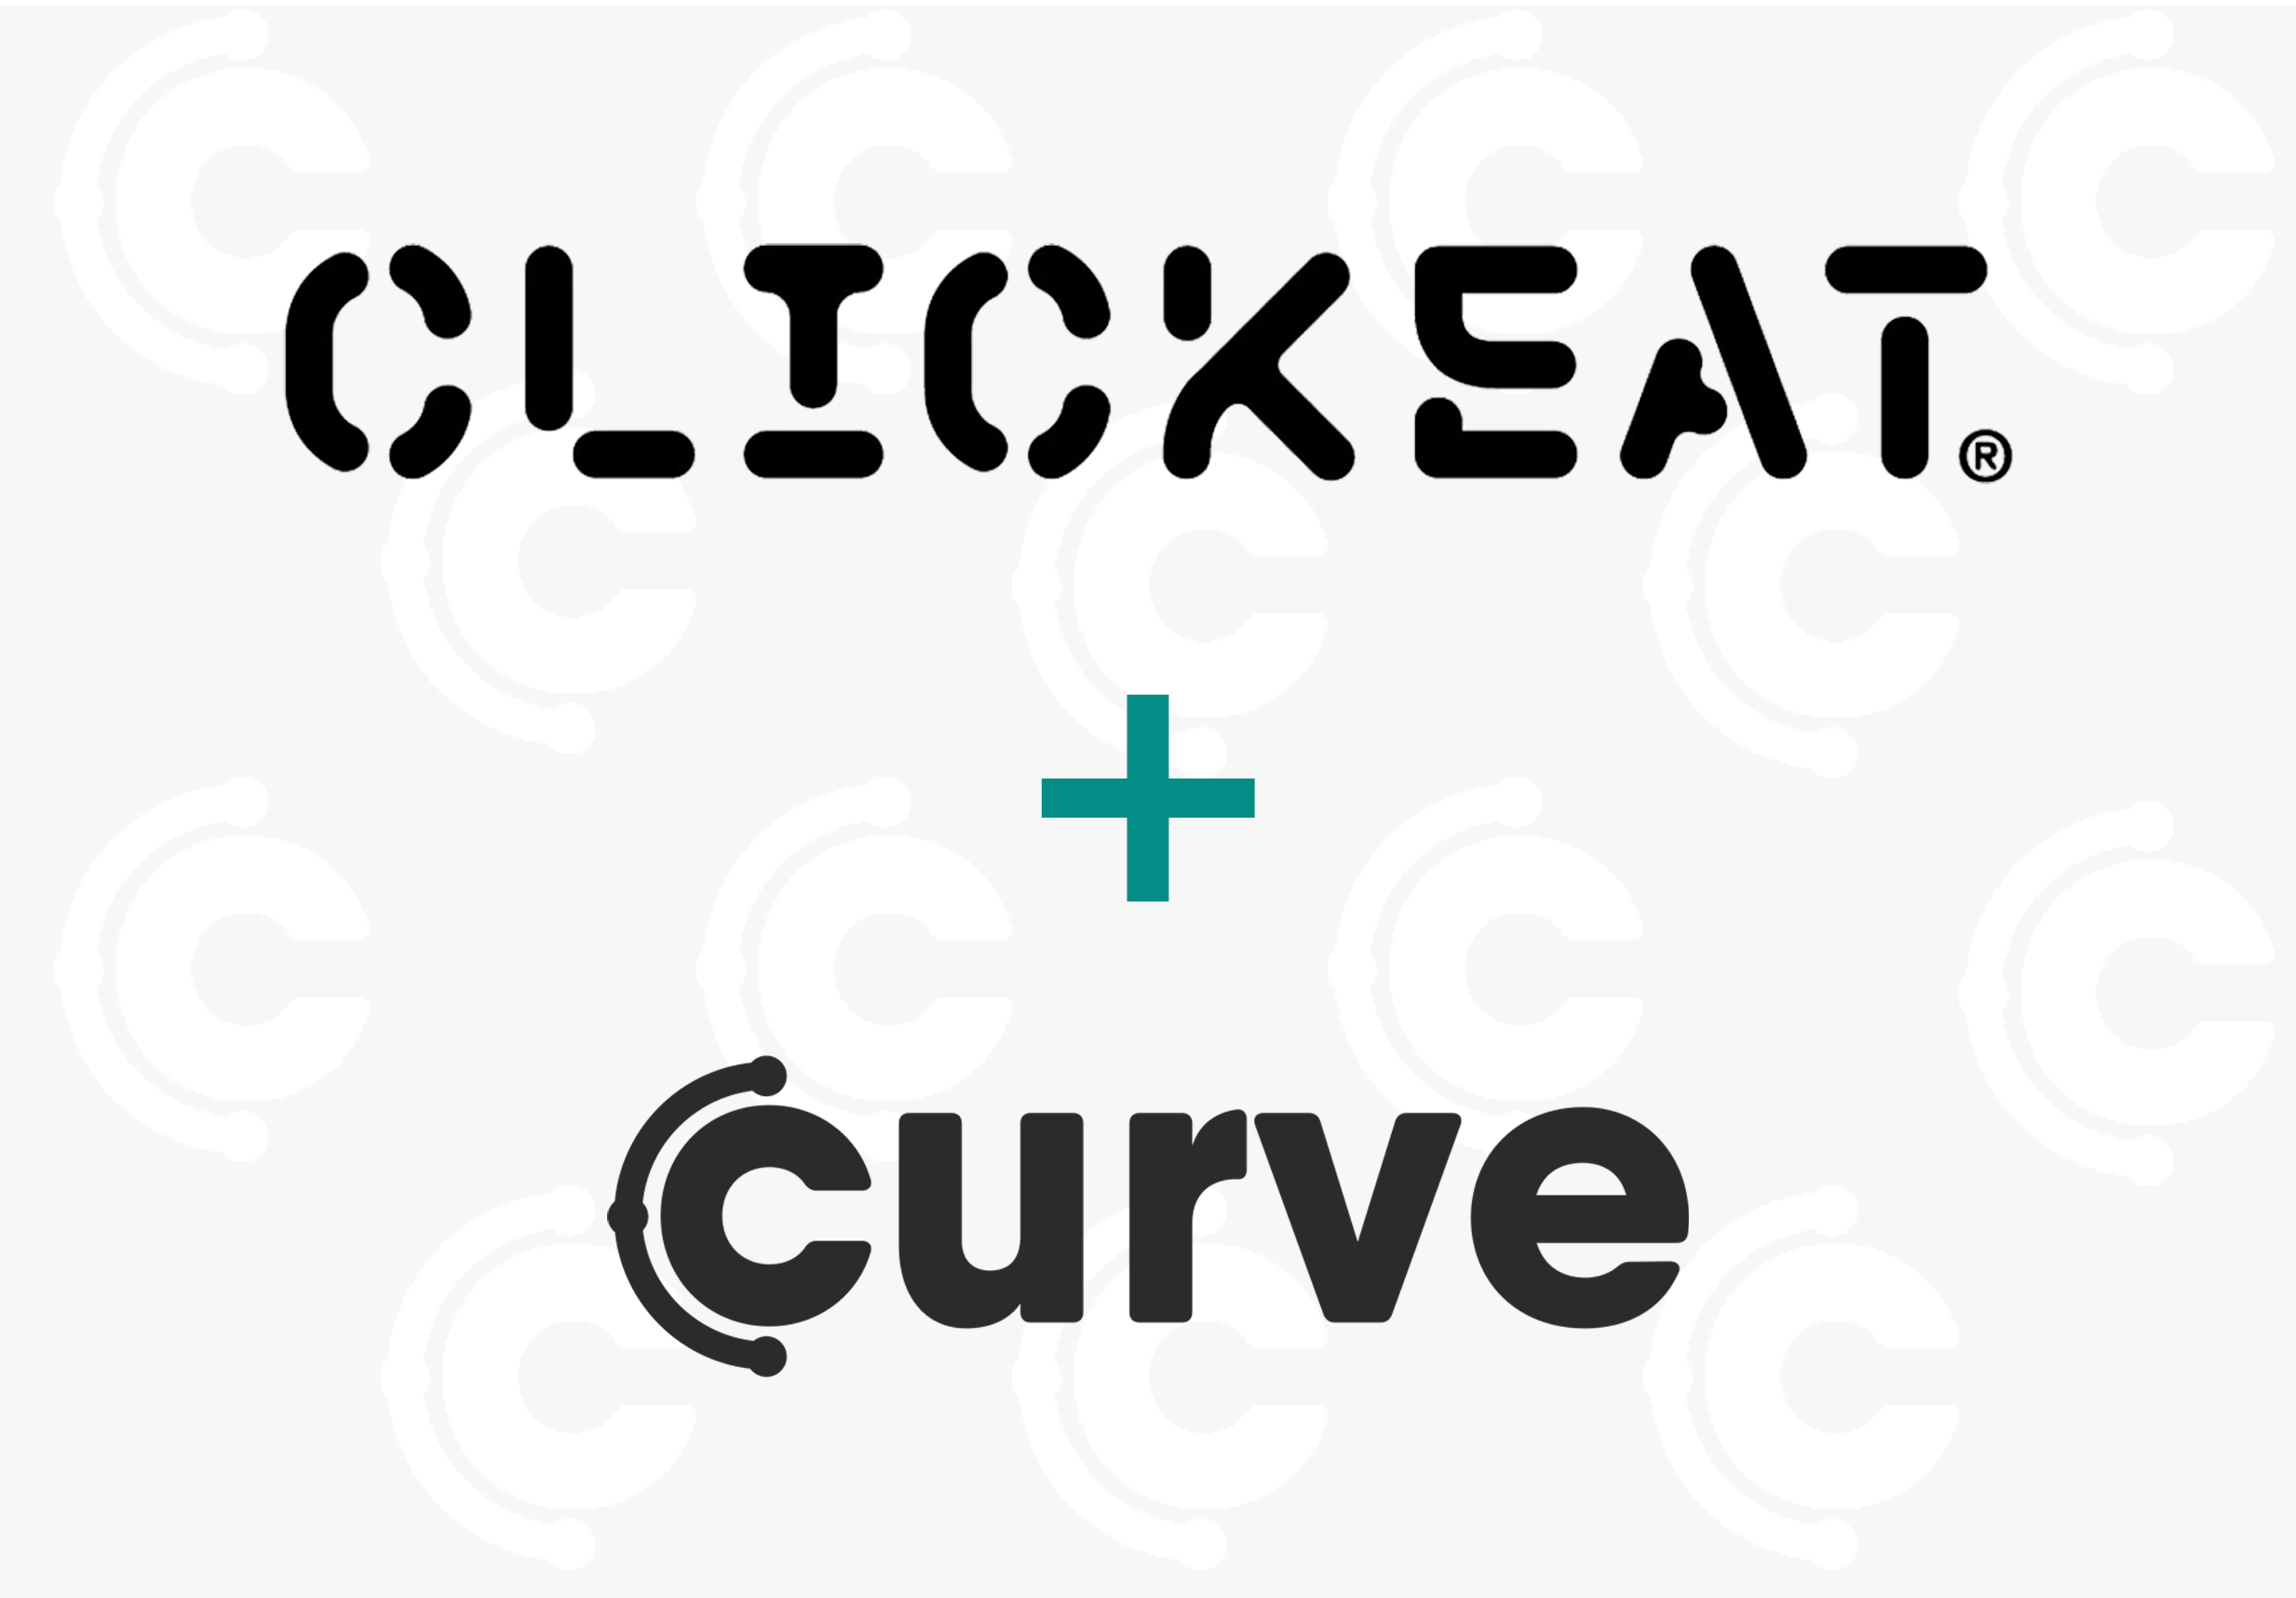 CURVE + CLICKEAT